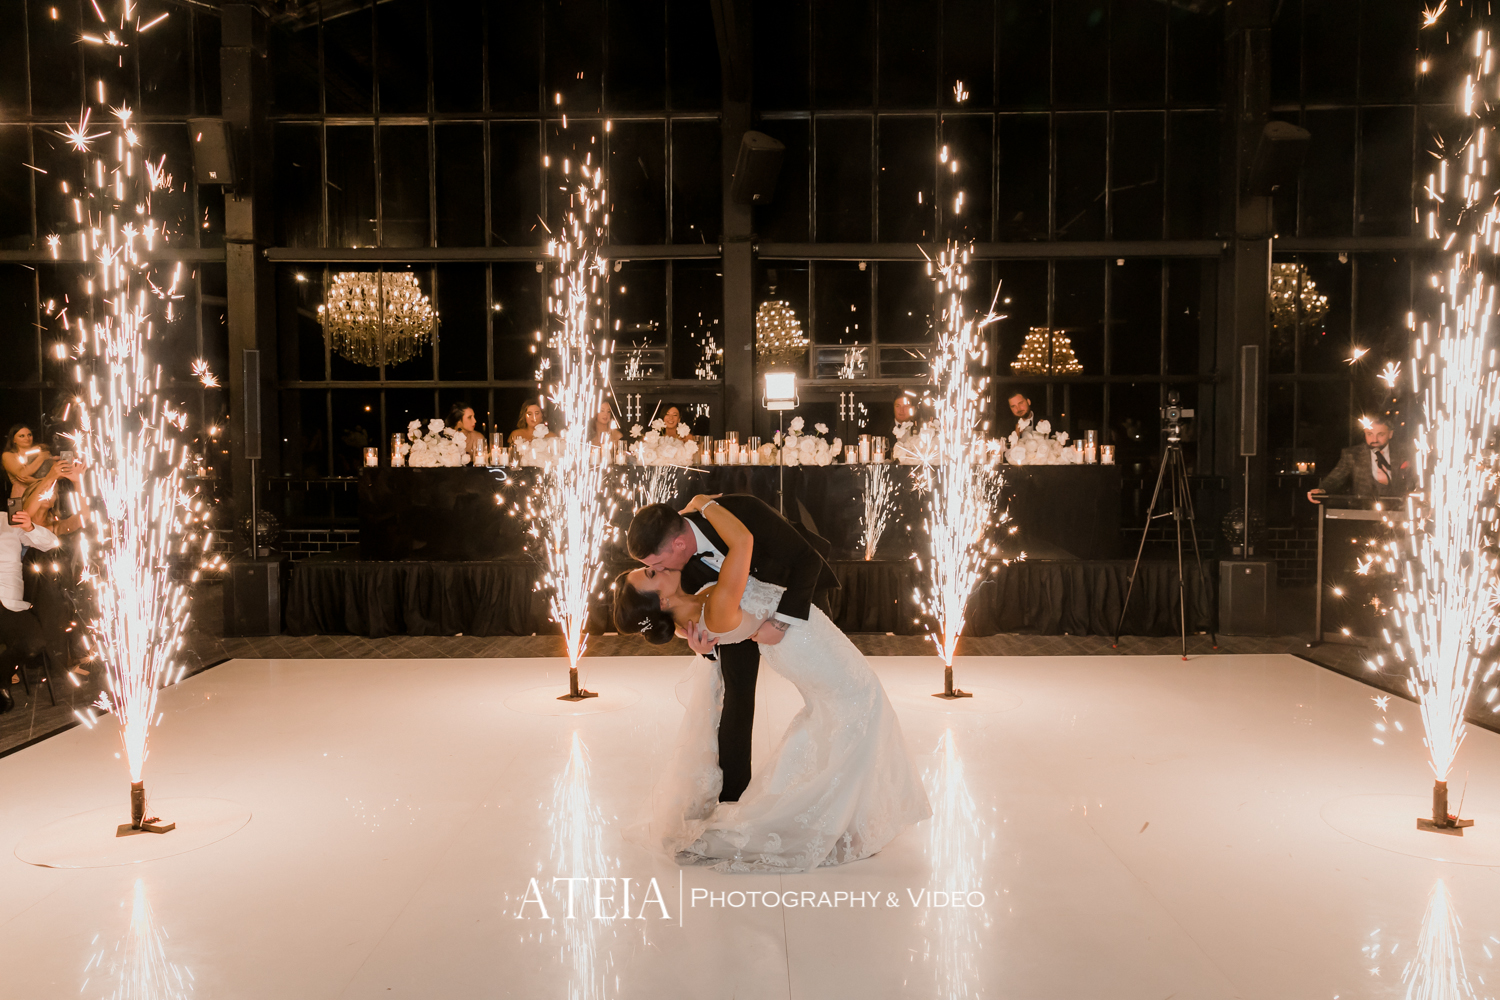 , Vanessa and Ben&#8217;s wedding at The Park Albert Park captured by ATEIA Photography &#038; Video